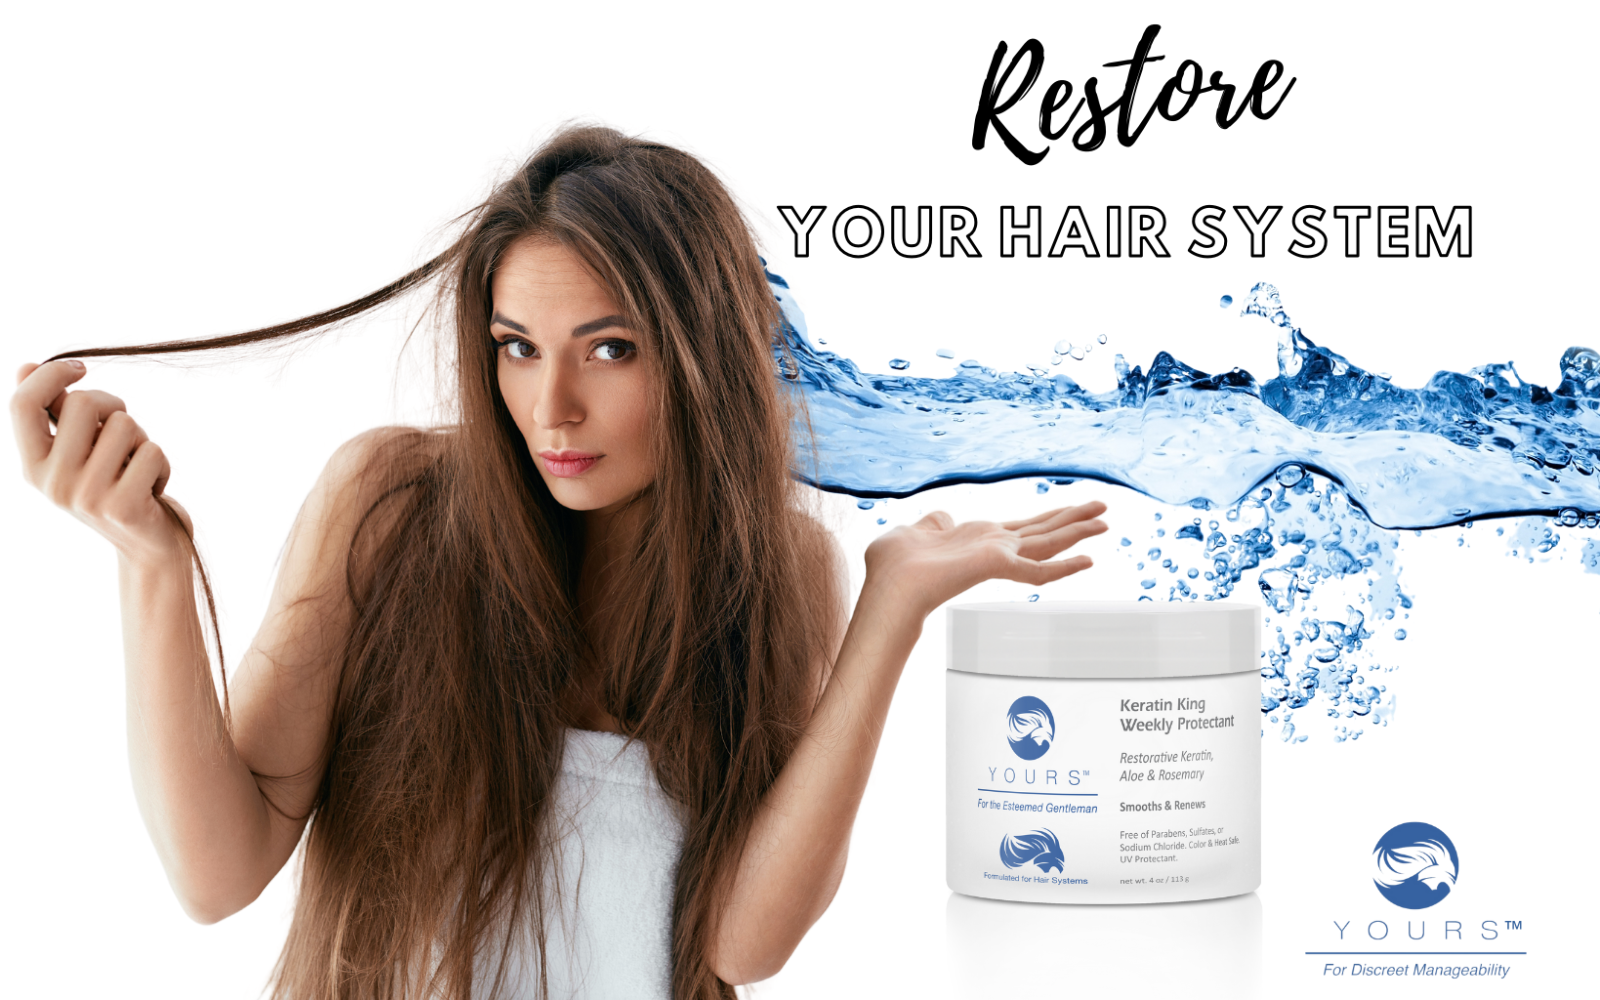 How to make my hair system feel new again | How to make your hair system last longer | How to remove the frizz from a hair system | What products can I use to make the hair system look new again | Keratin King Weekly Treatment | Hair System Products | Hair System Care Products 